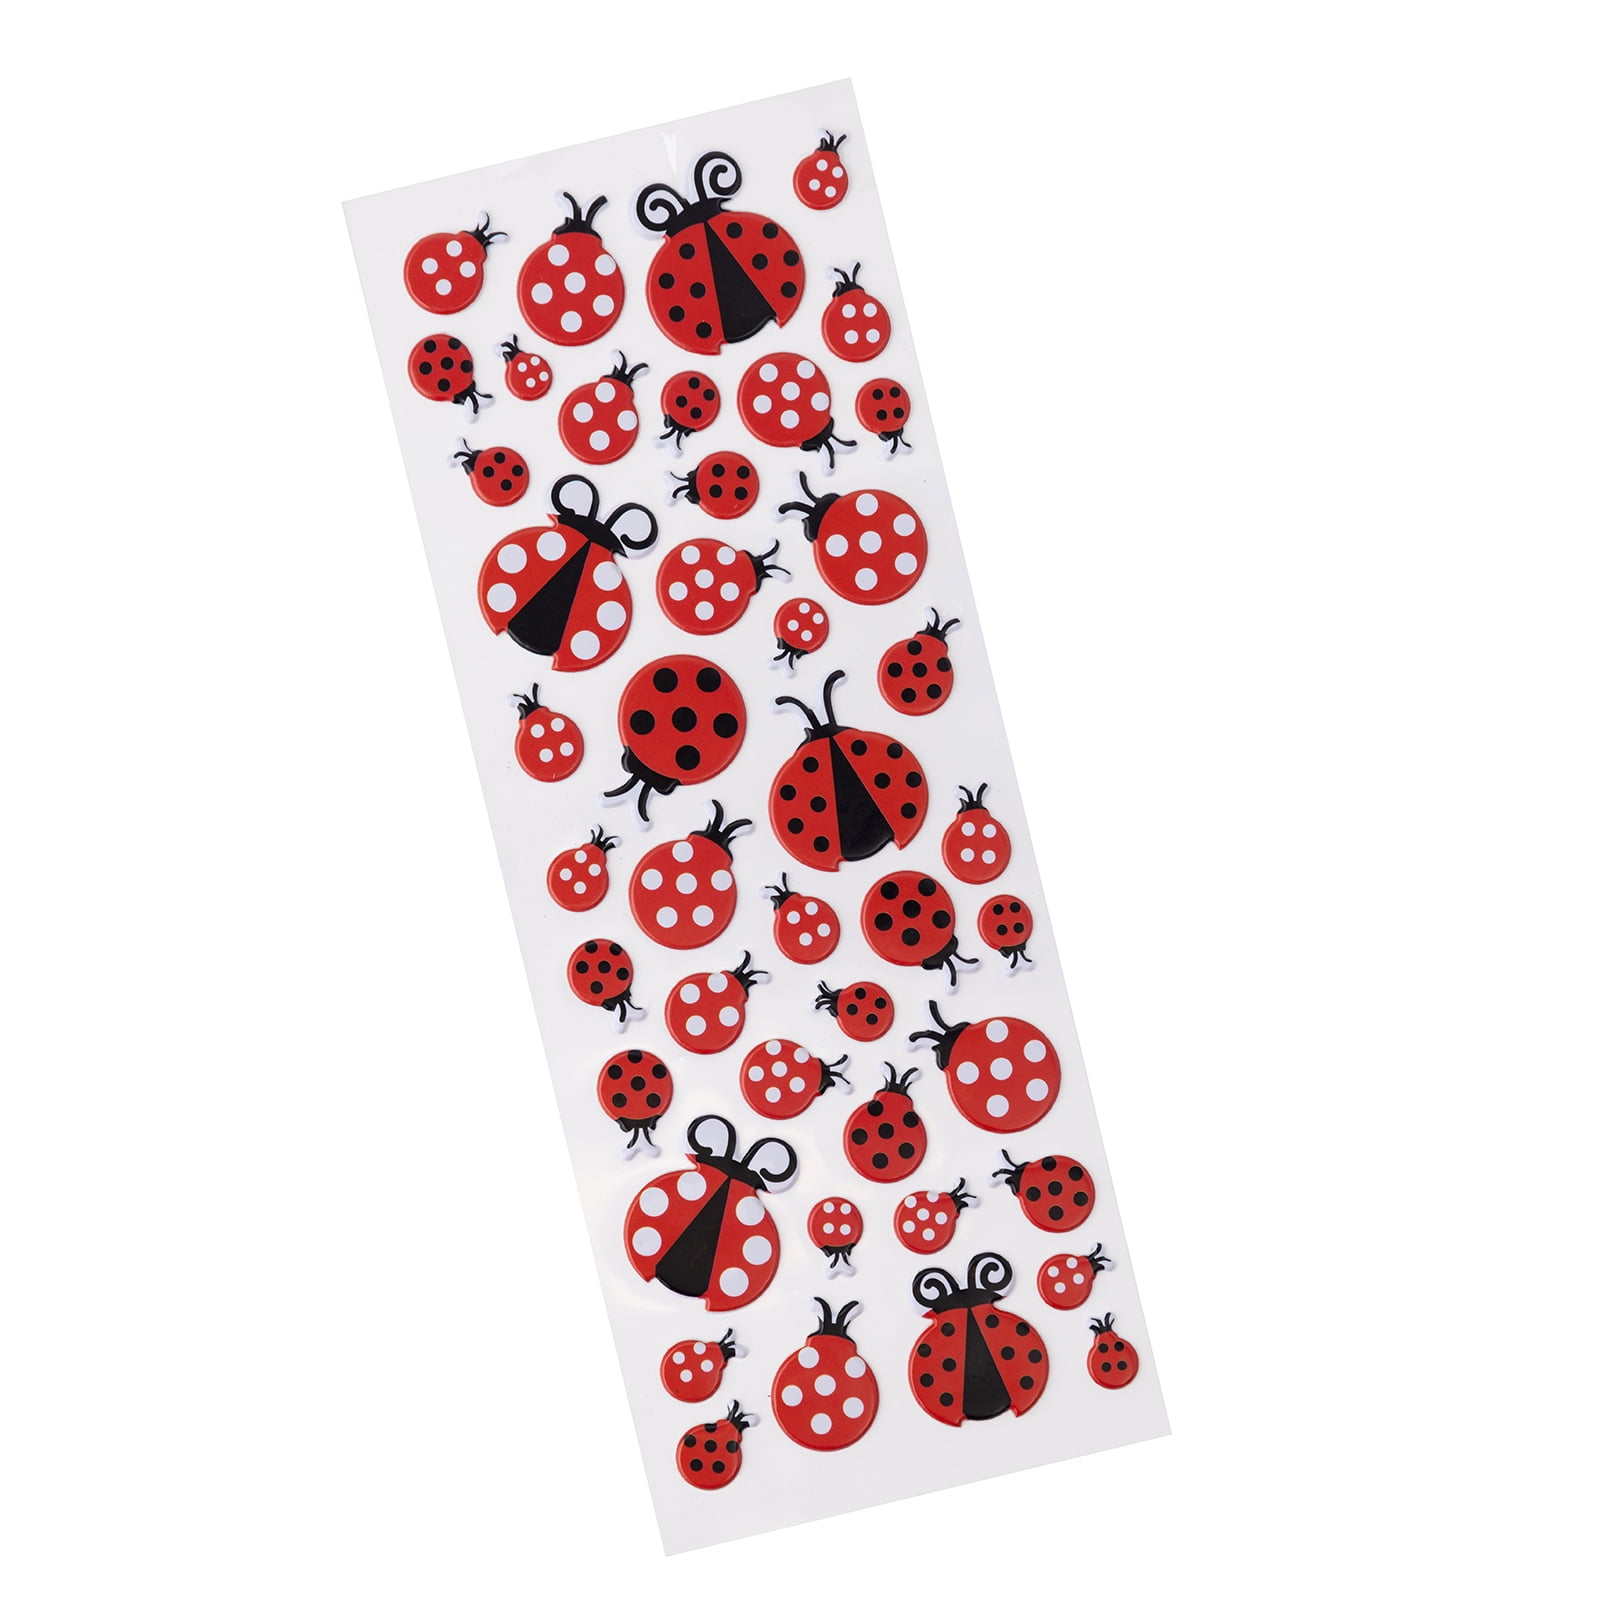 Sticko Tiny Stickers-Cat, 1 count - Pay Less Super Markets